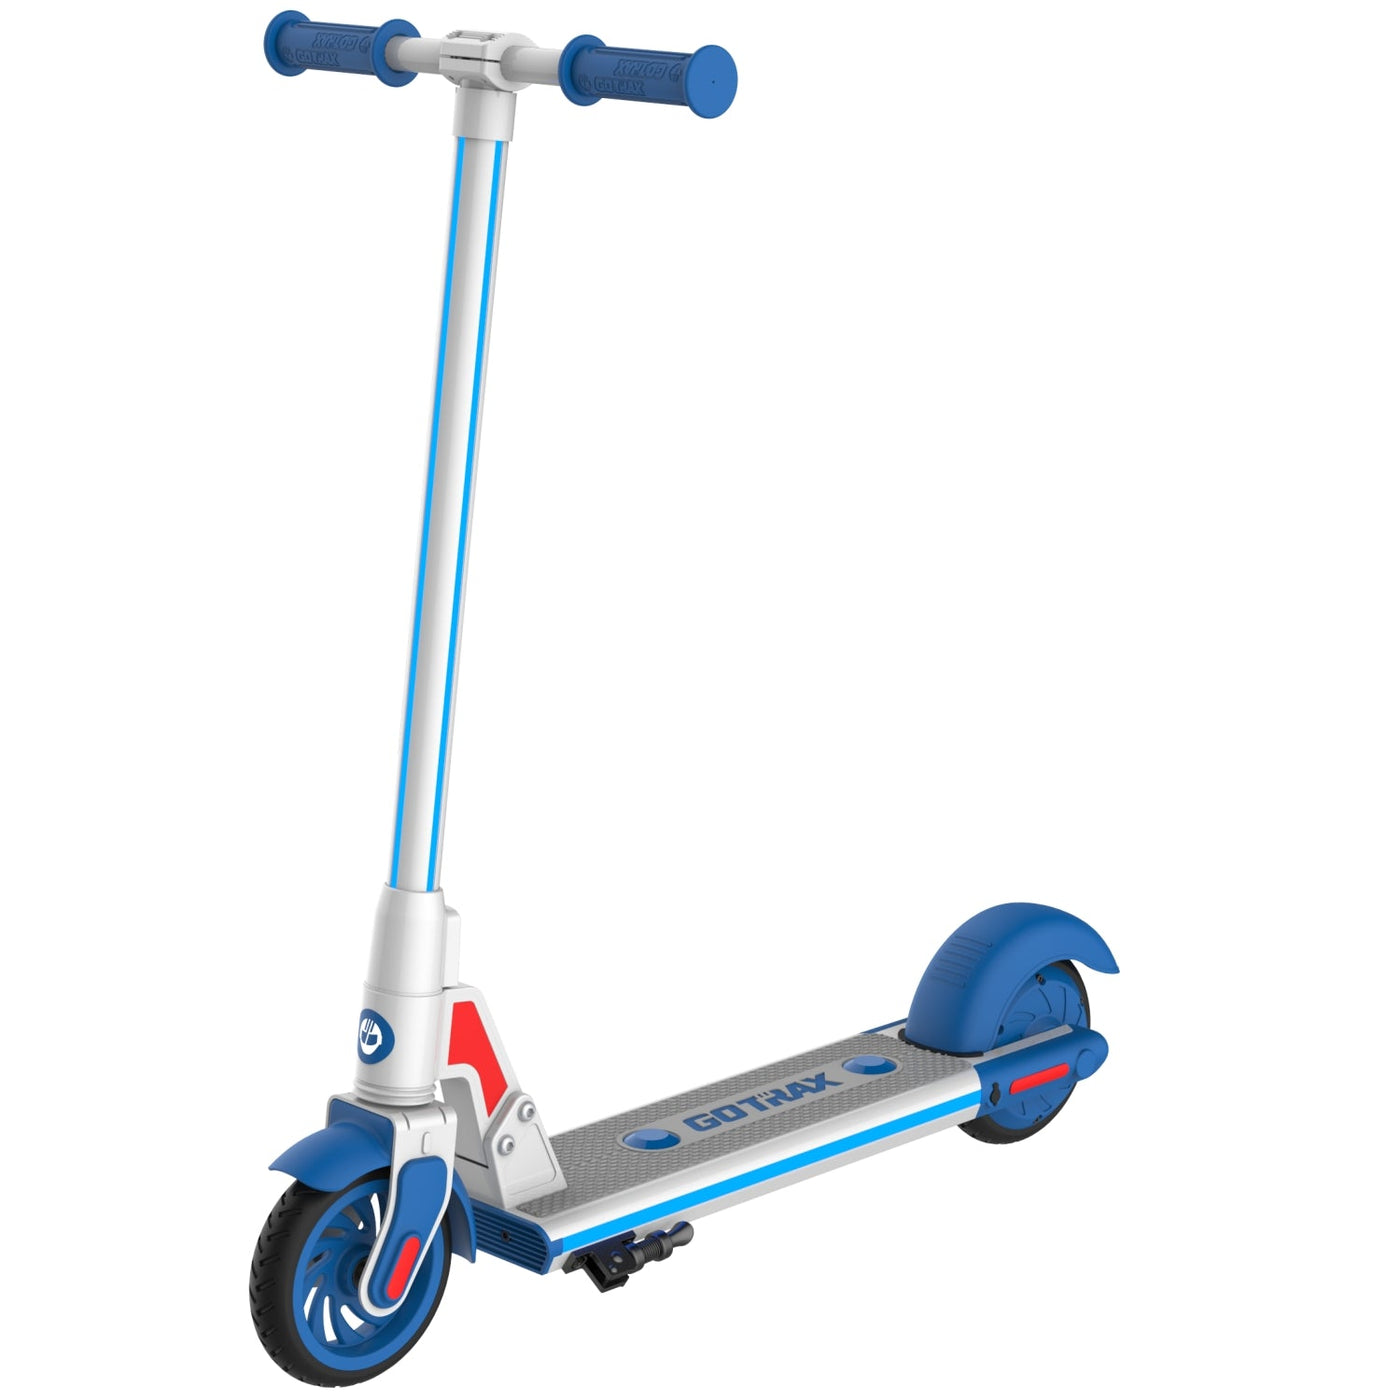 GKS Plus LED E-Scooter for Kids - GOTRAX